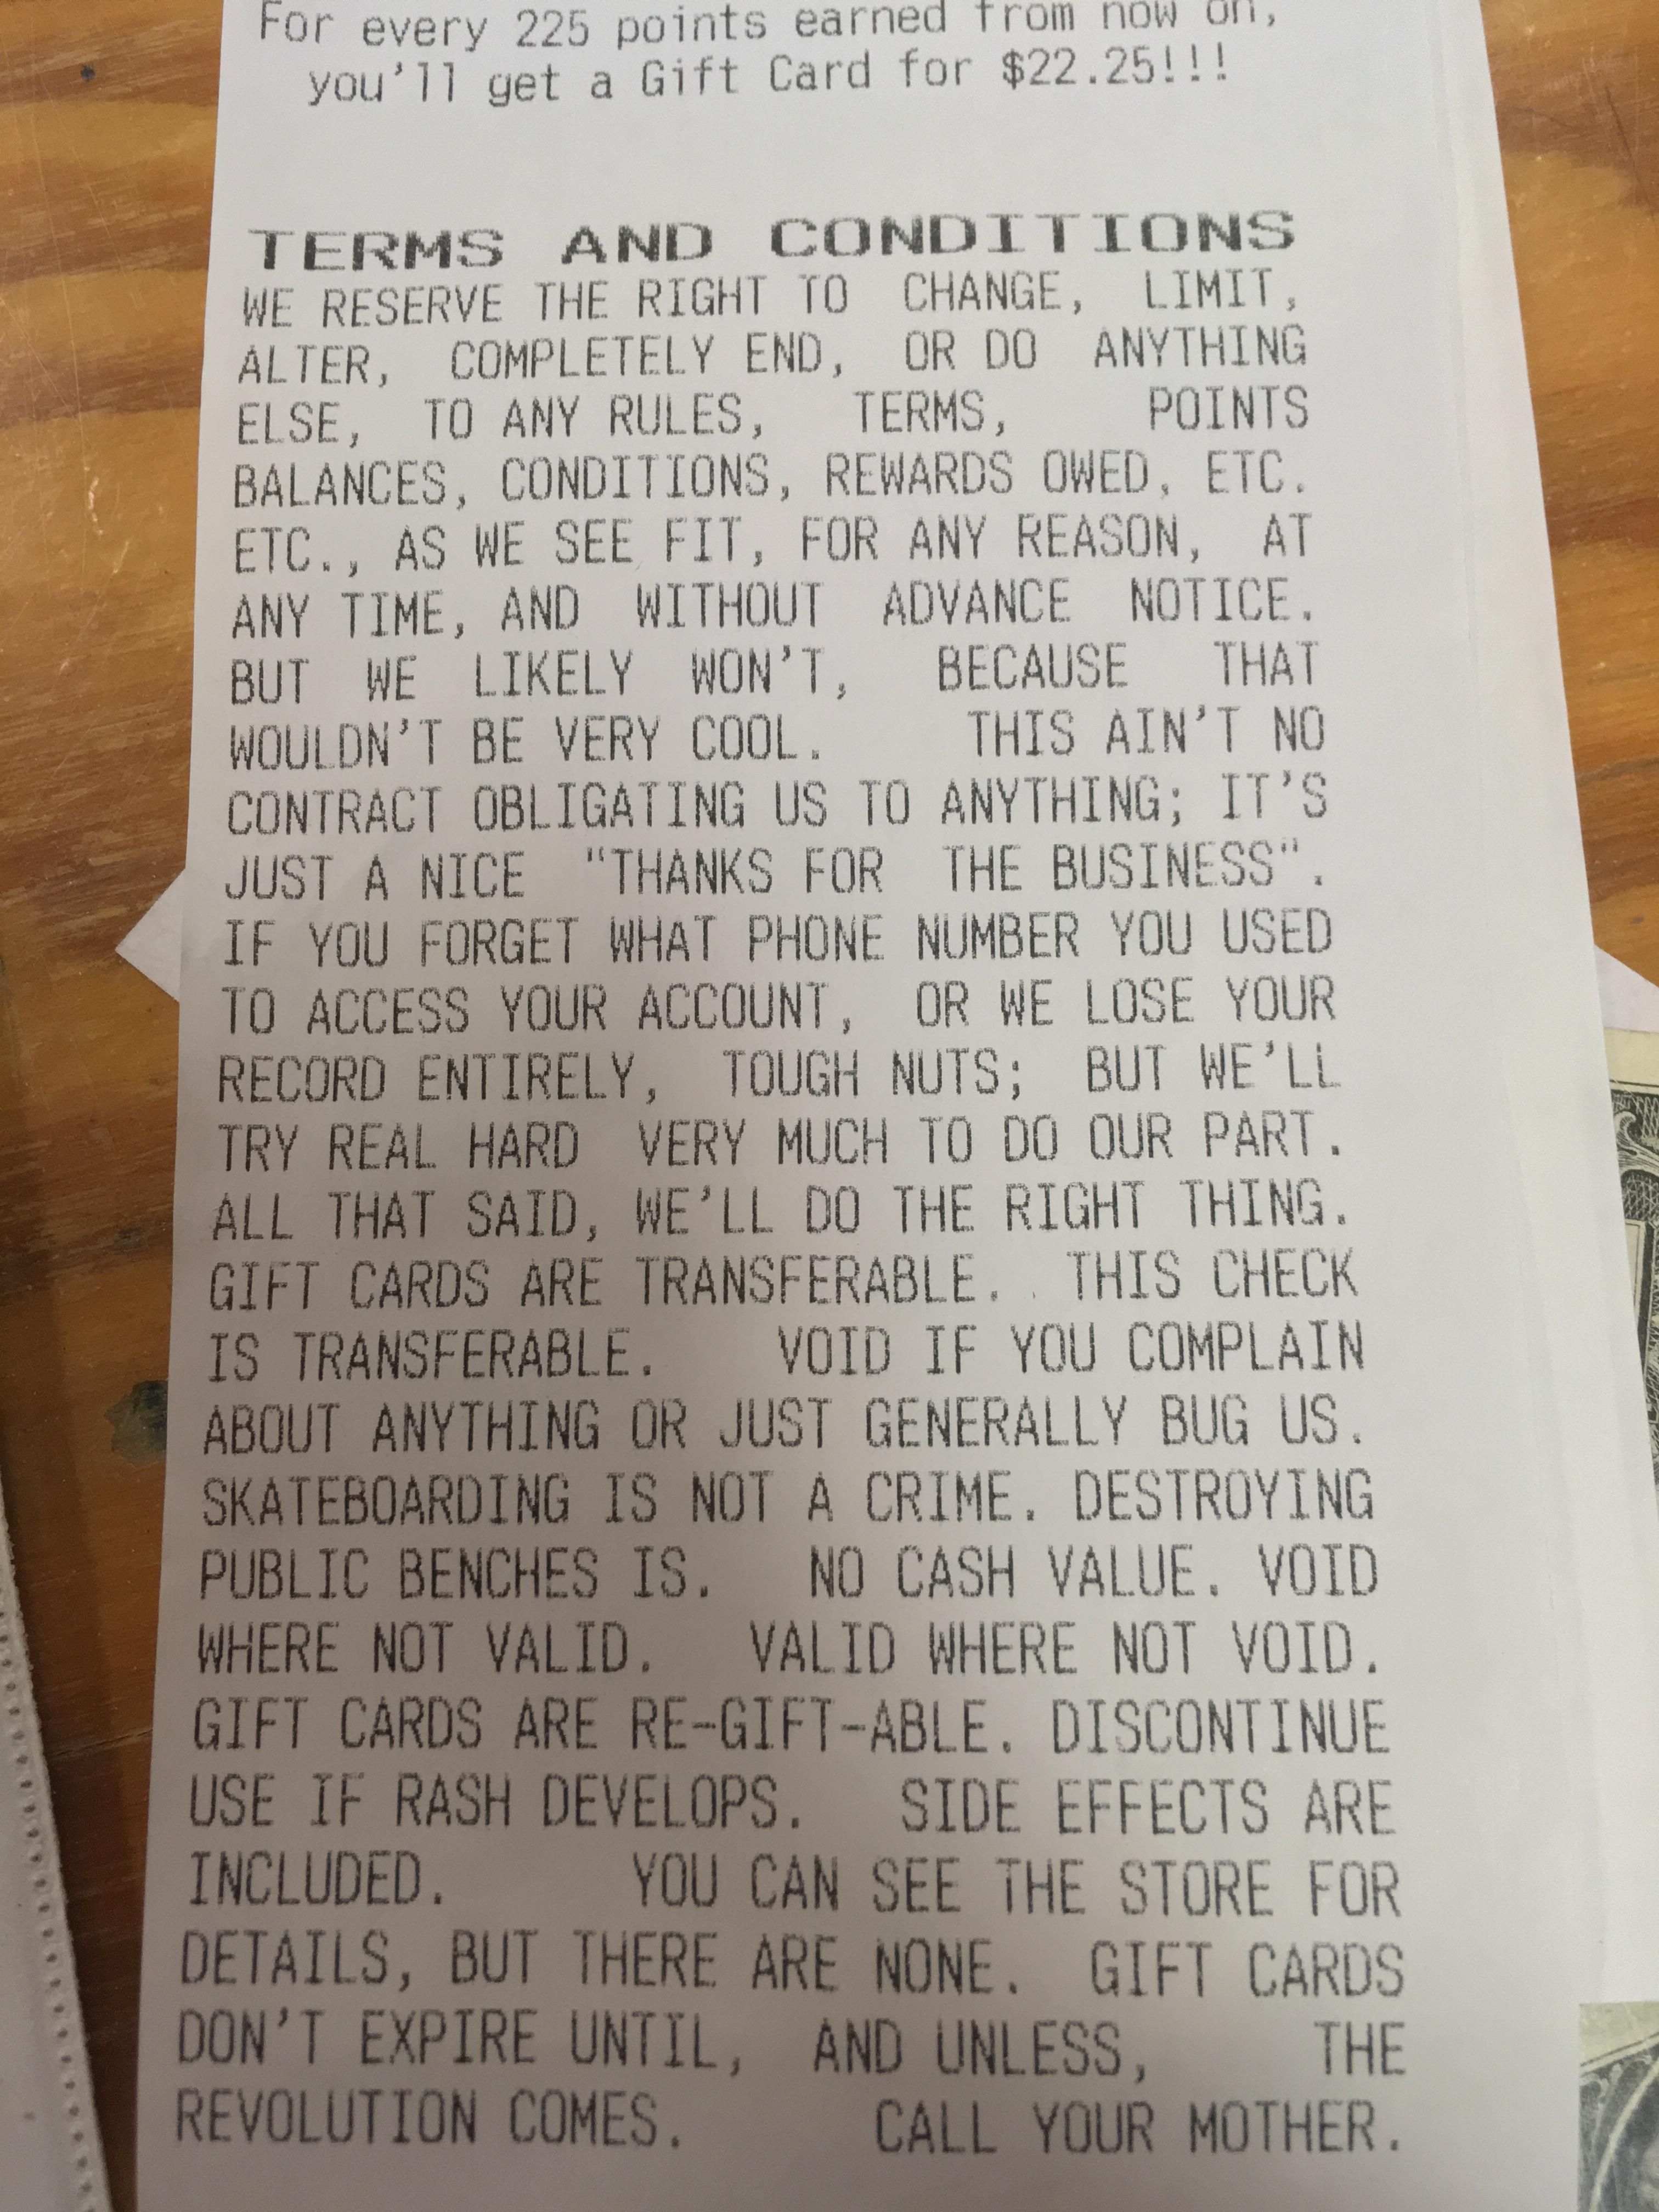 Terms and conditions for gift cards at Shakespeare's Pizza